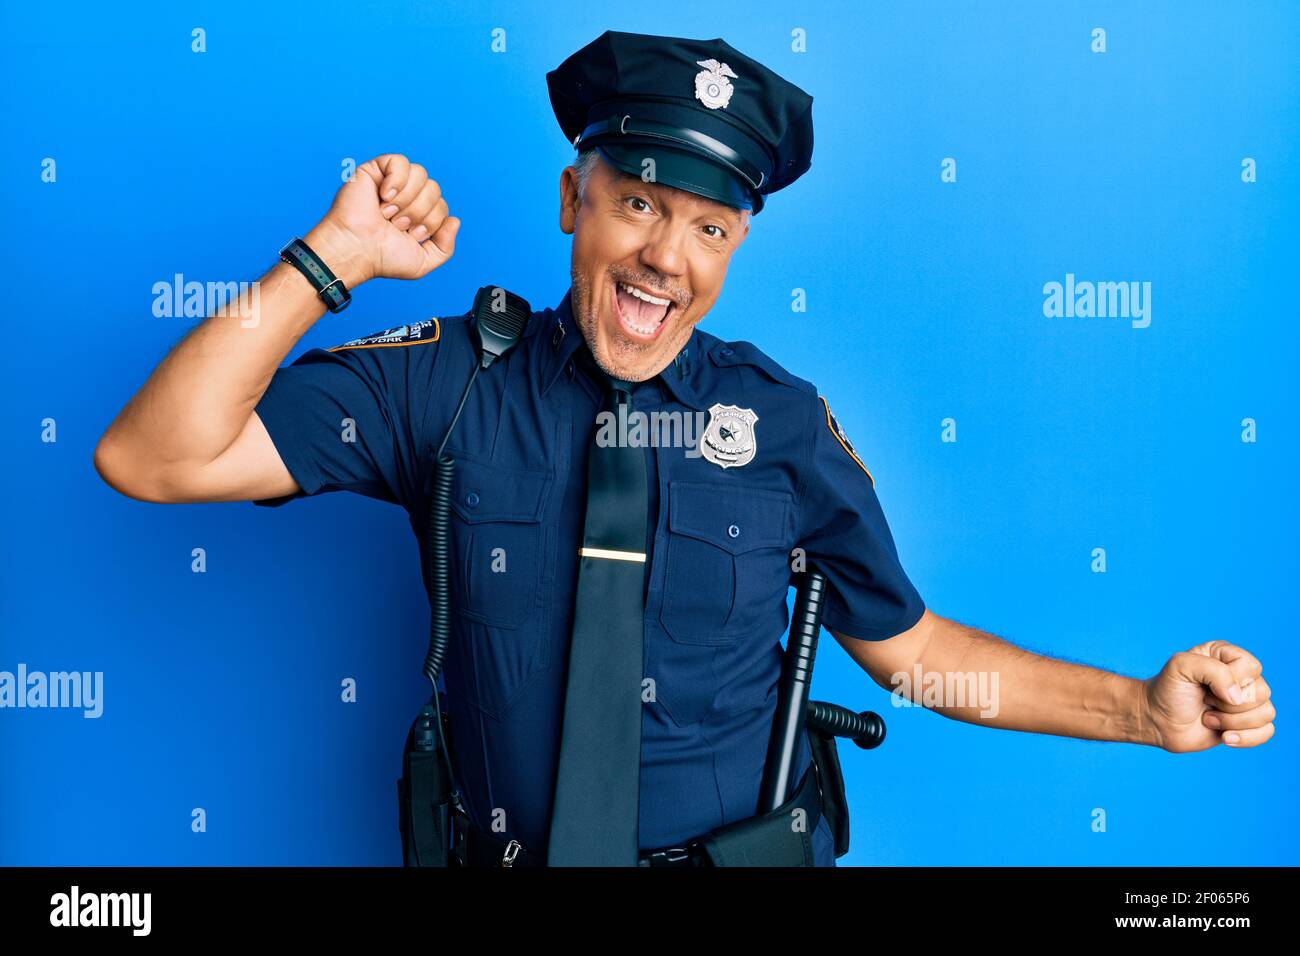 Handsome middle age mature man wearing police uniform dancing happy and  cheerful, smiling moving casual and confident listening to music Stock  Photo - Alamy